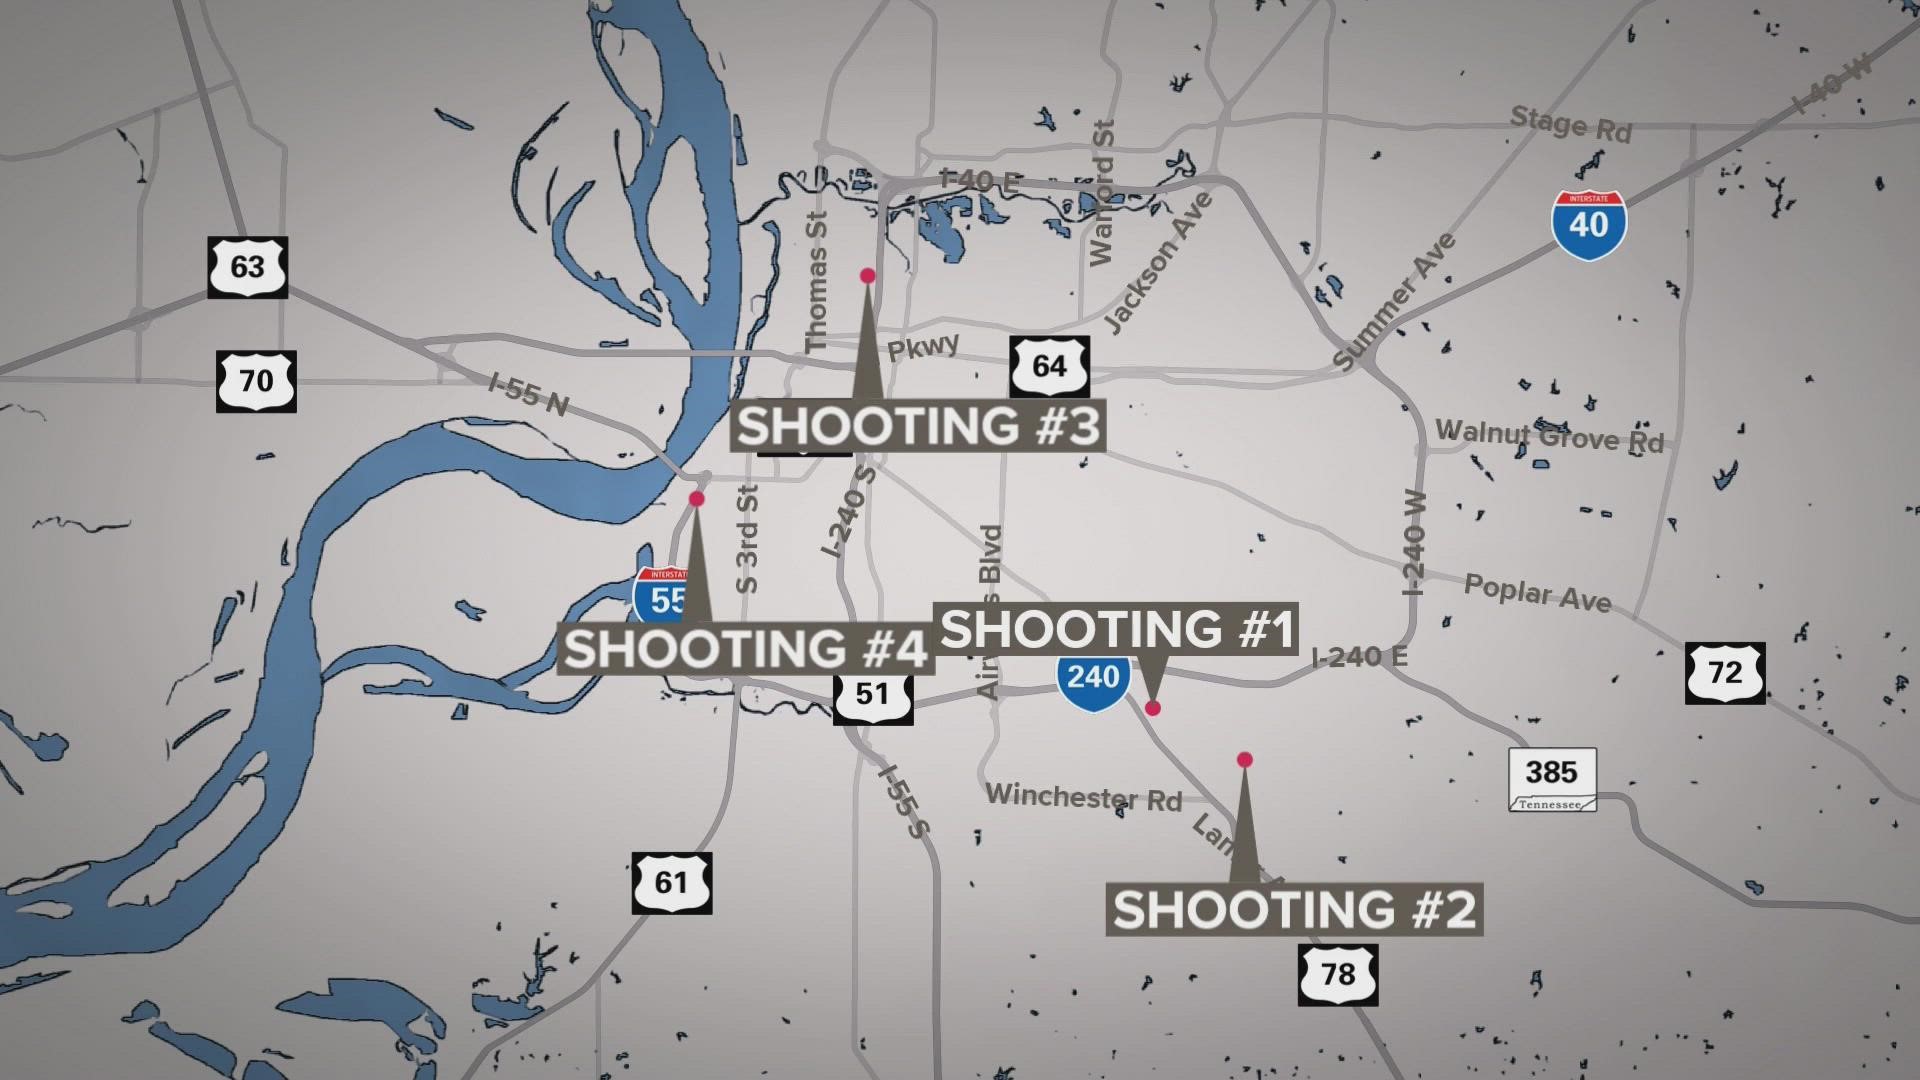 Five shootings were reported by the Memphis Police Department (MPD) between June 24 and 25. Four of these incidents were fatal, according to MPD.